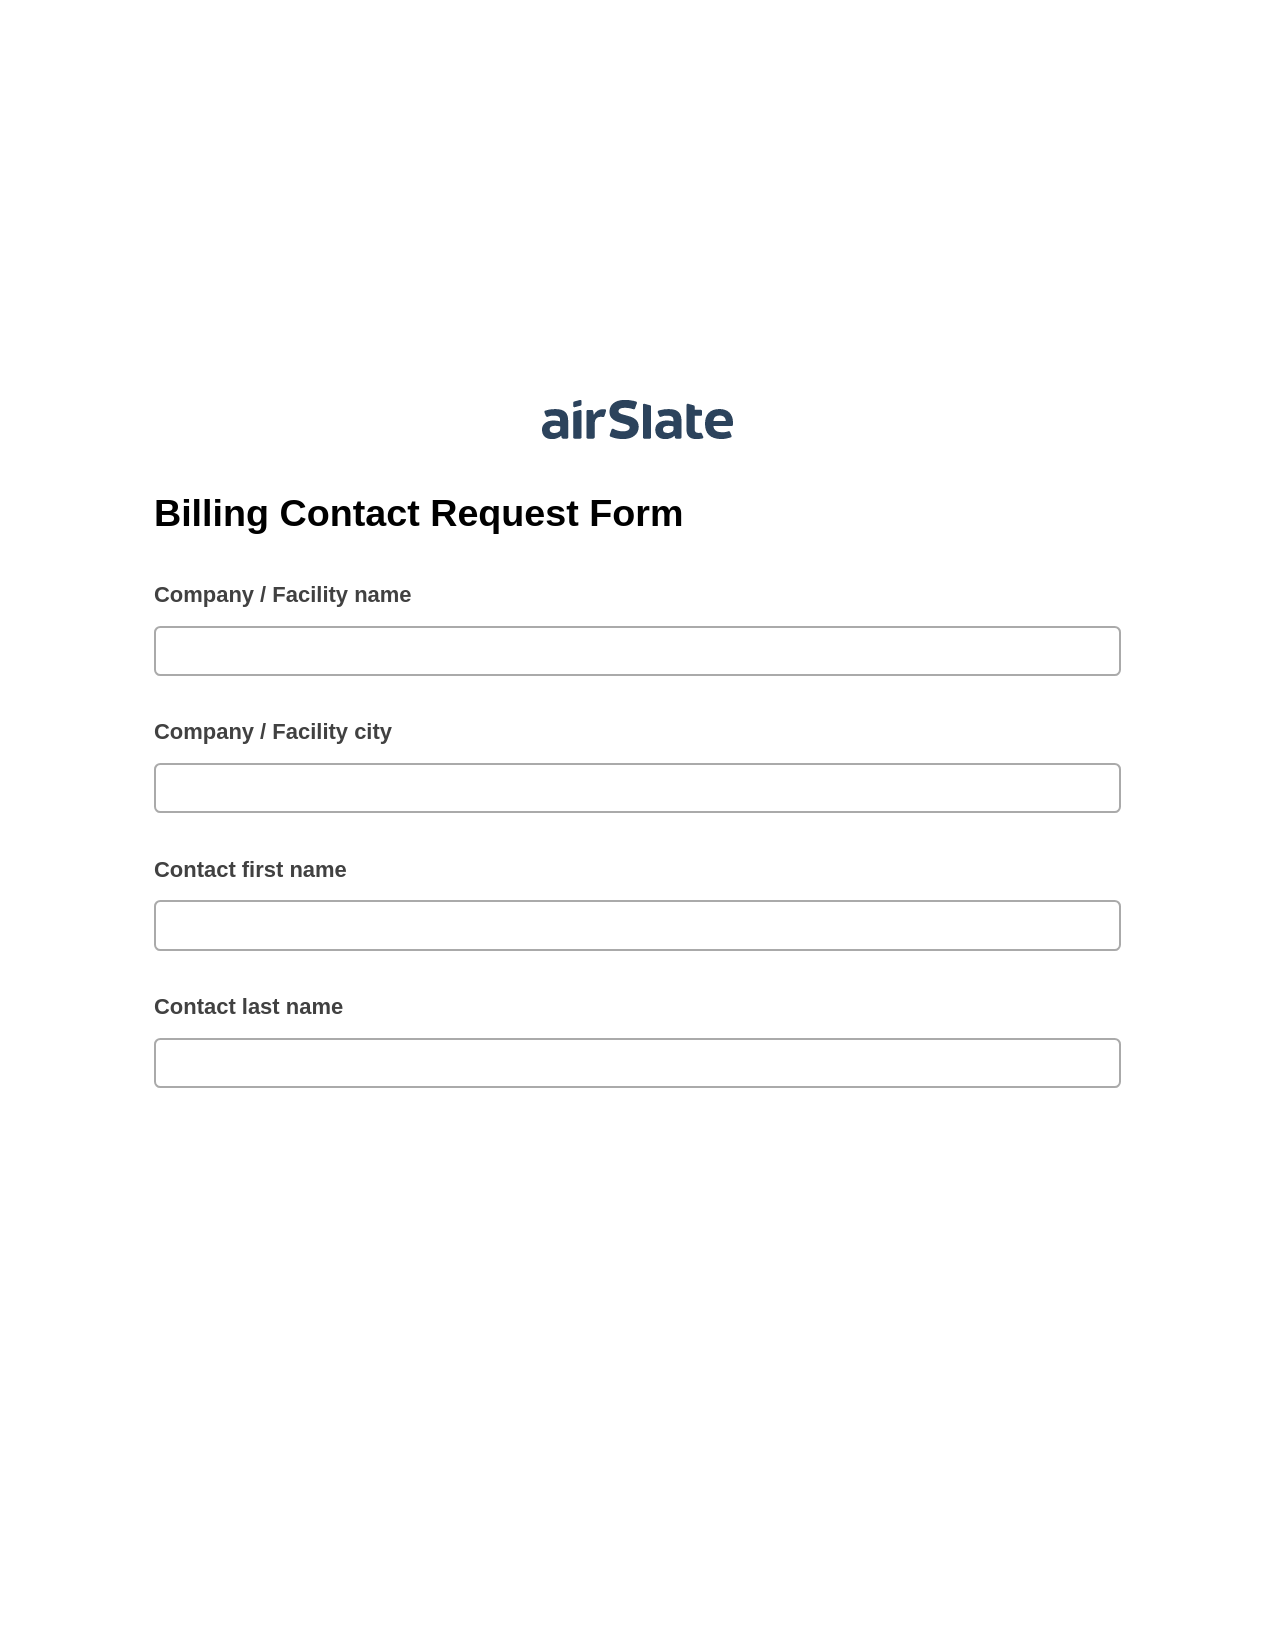 Multirole Billing Contact Request Form Pre-fill from Salesforce Records with SOQL Bot, Google Calendar Bot, Box Bot